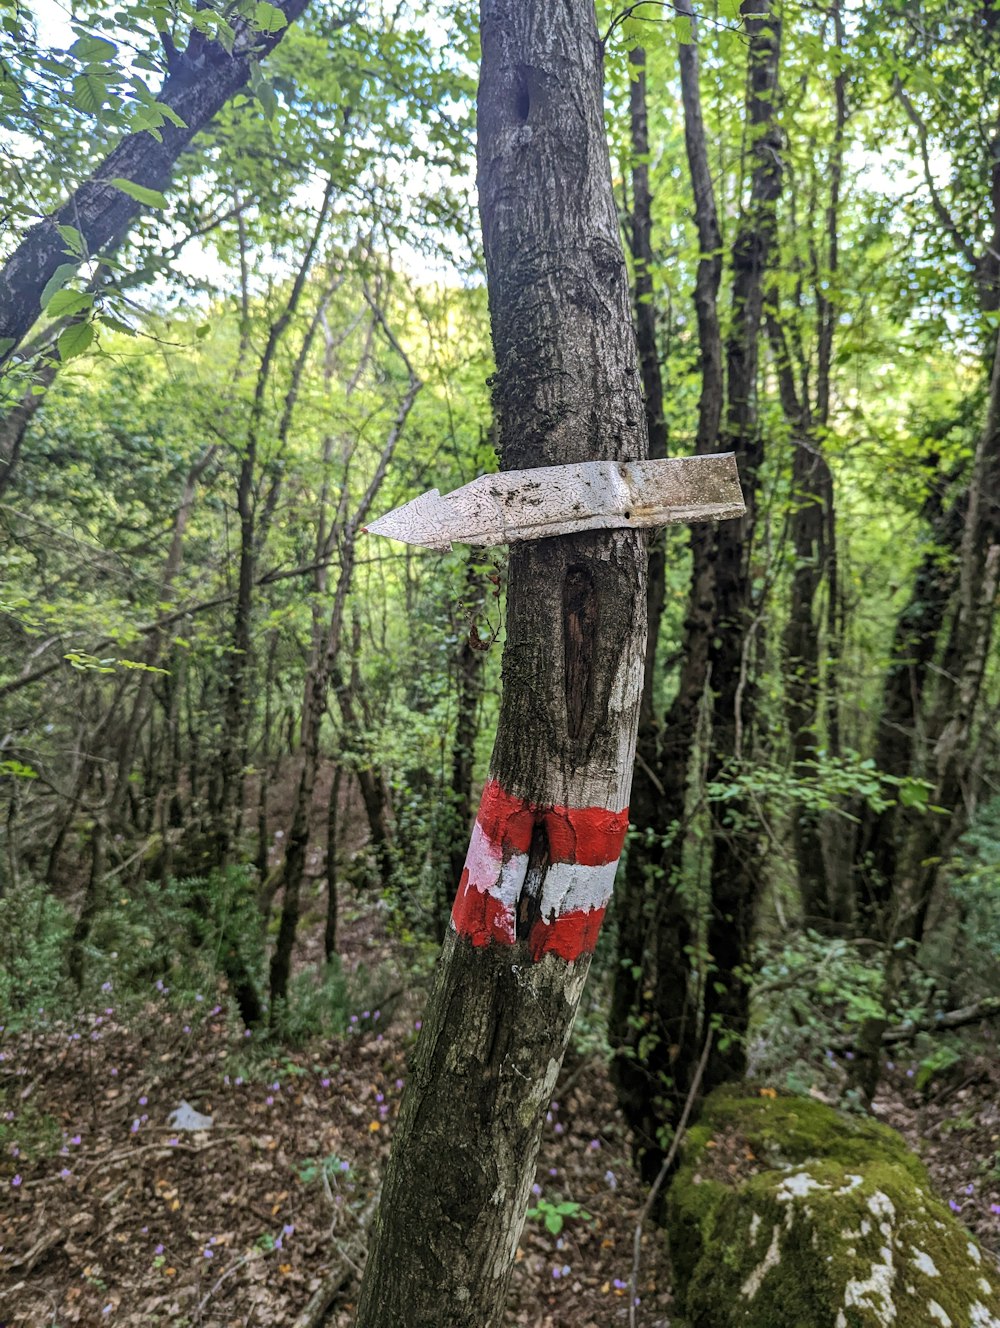 a tree with a sign on it